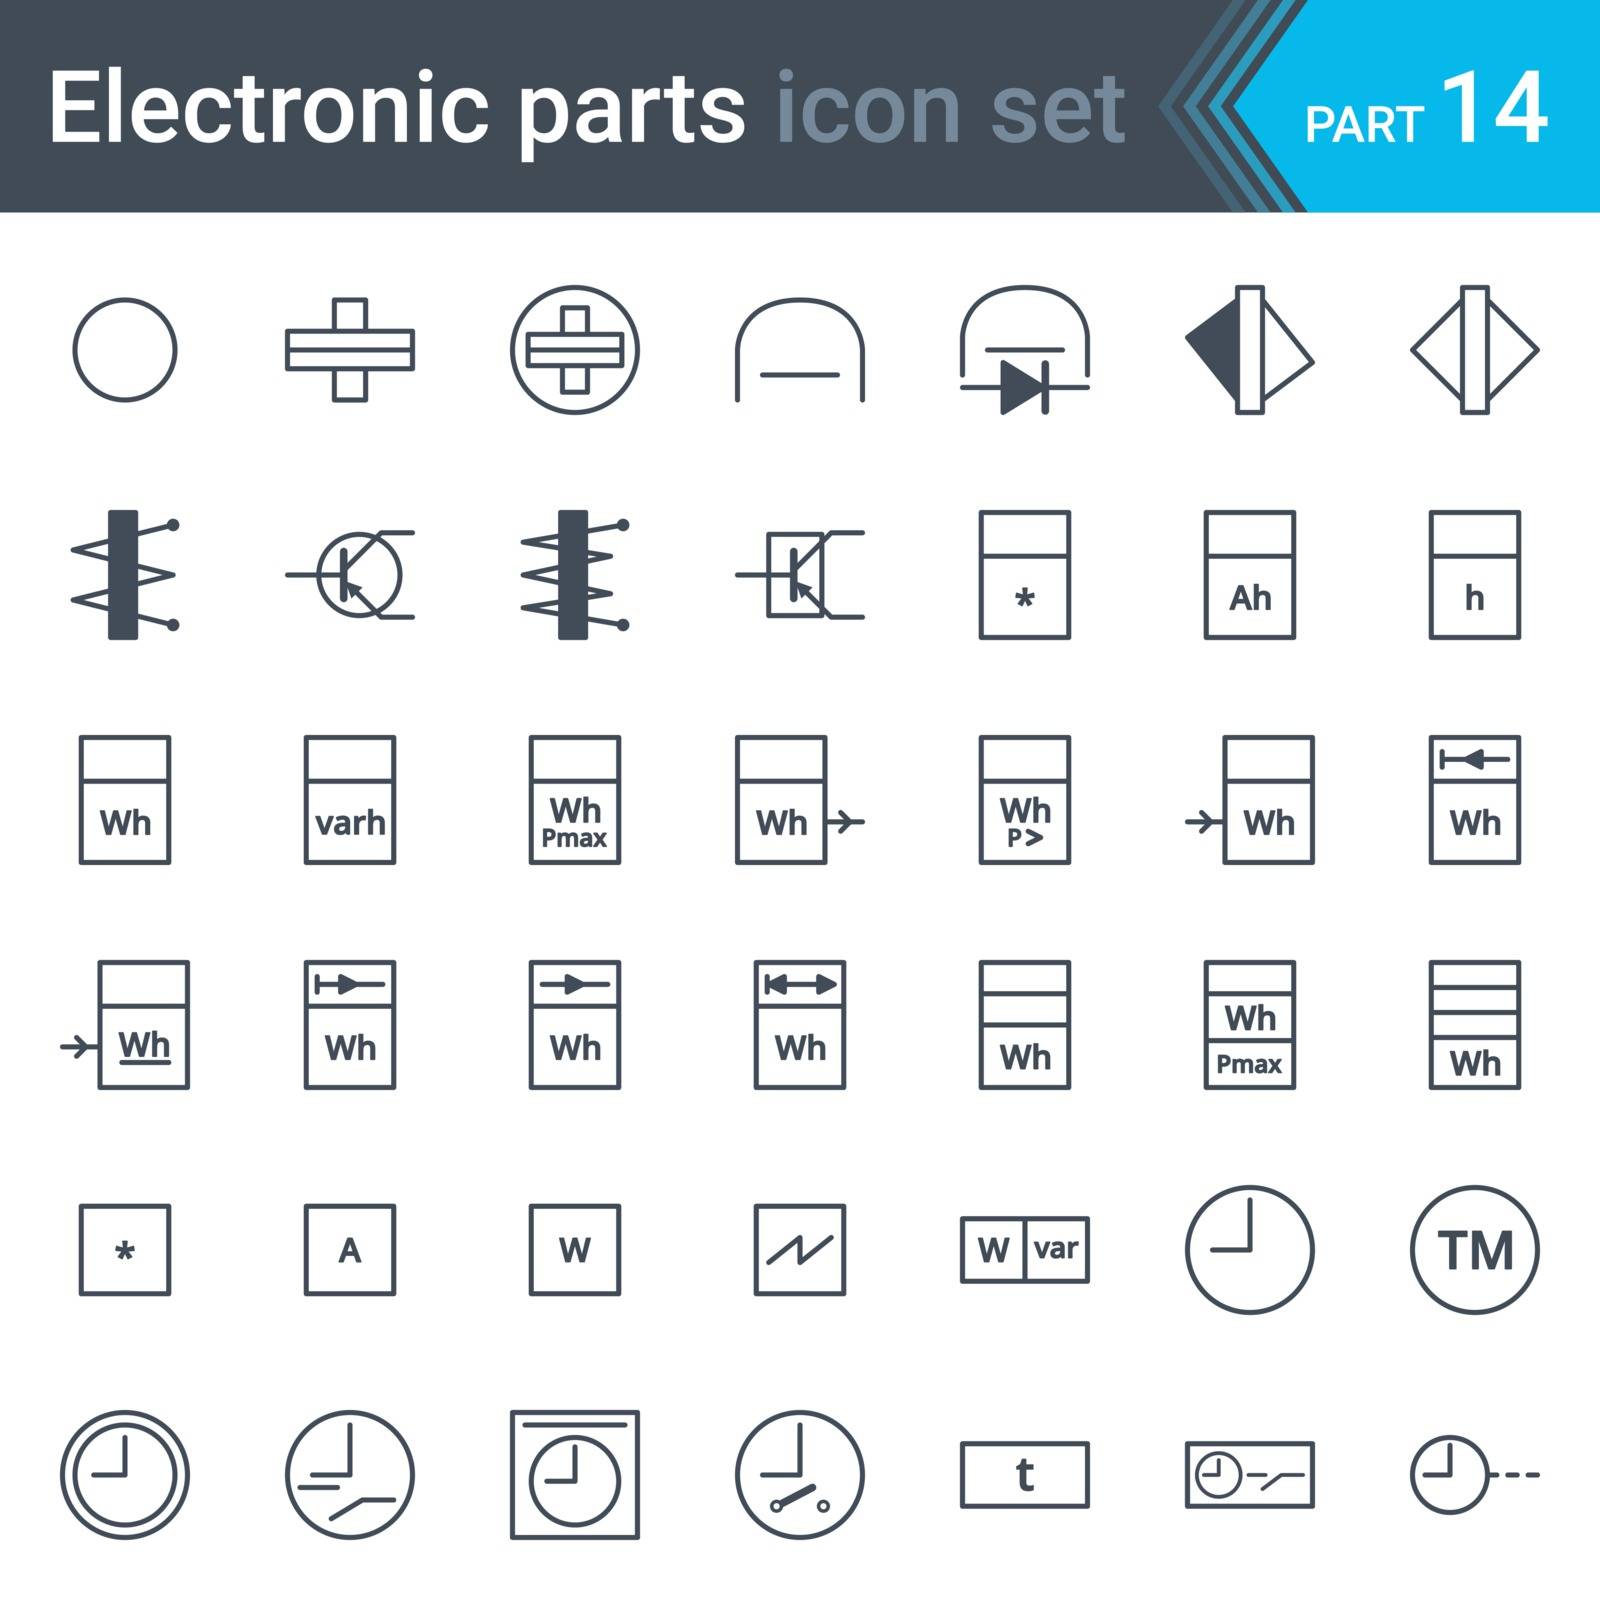 Electric and electronic circuit diagram symbols set of electrical instrumentation, meters, recorders, counters, integrators, registrars, clocks and timers by vermicule